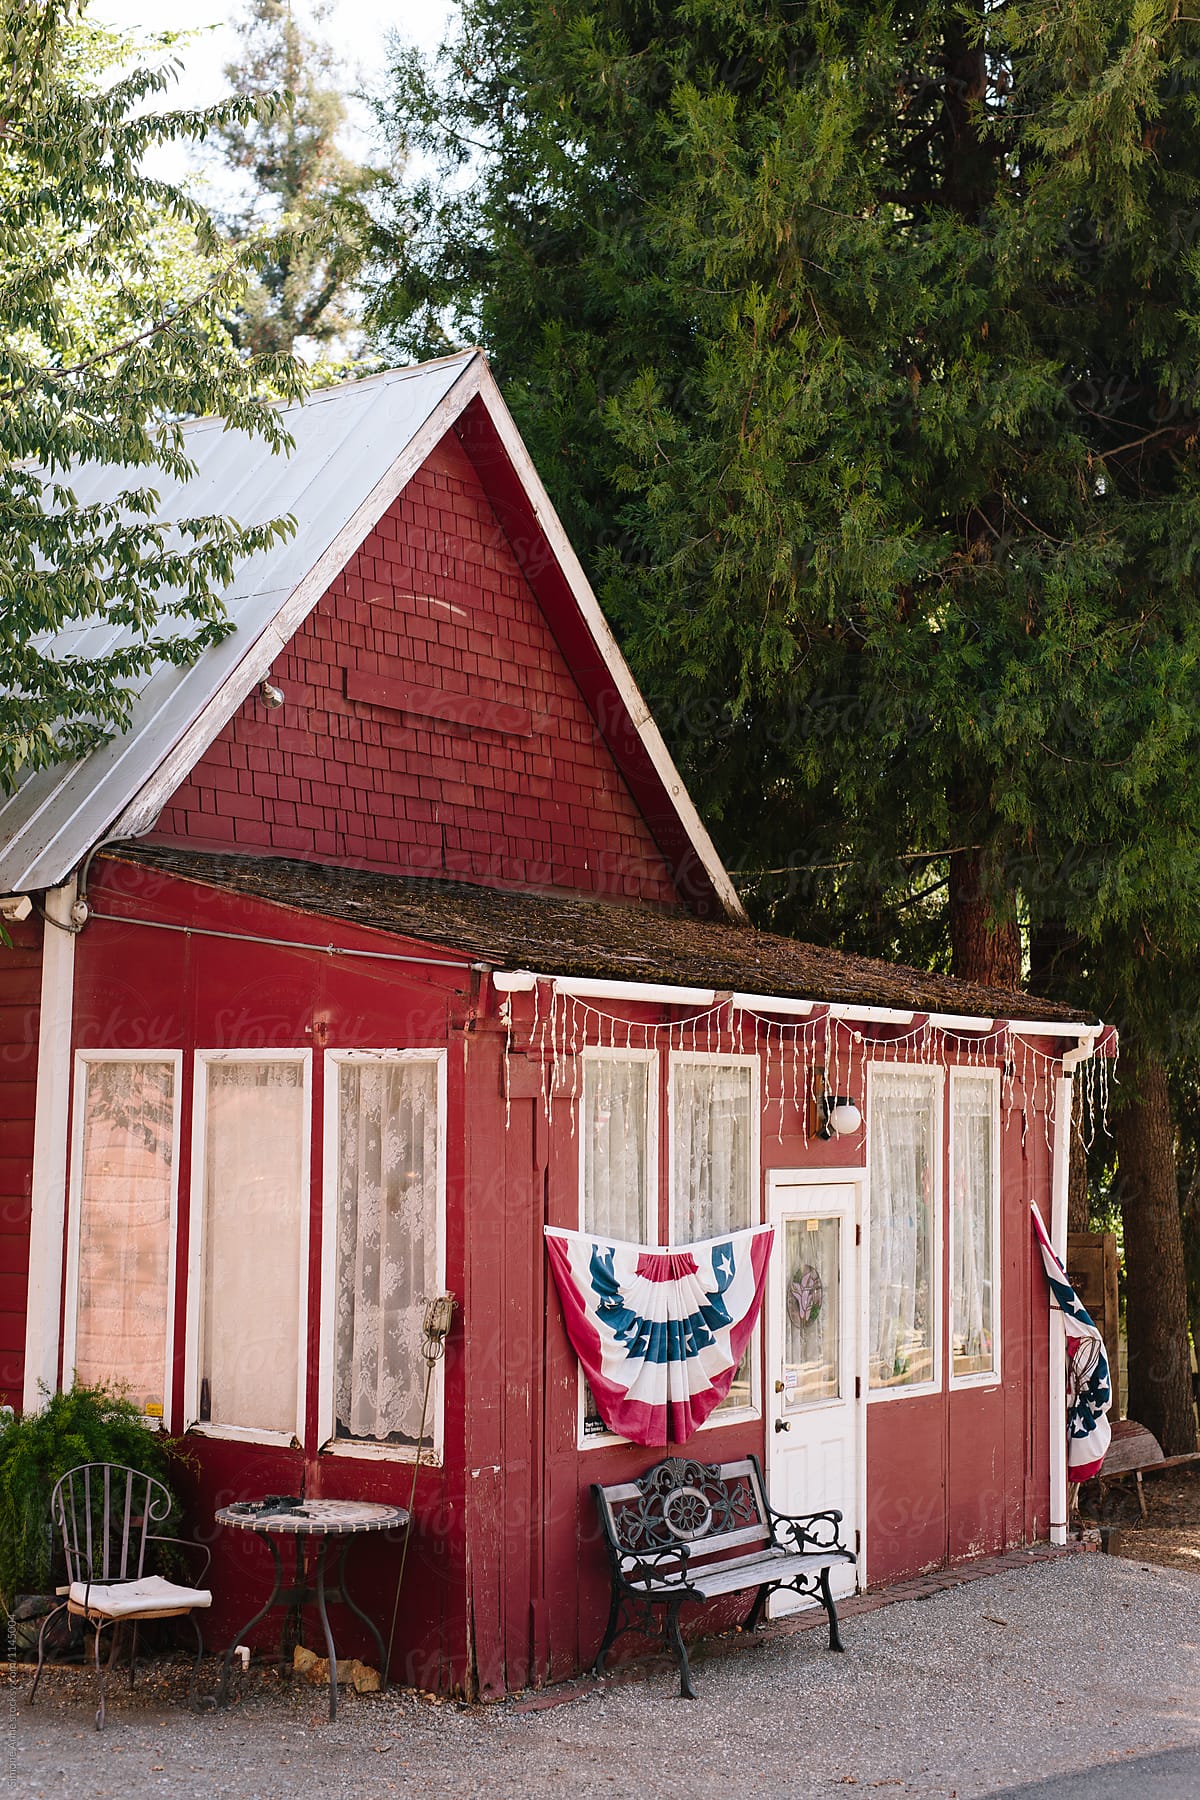 Red house with American flag design in front